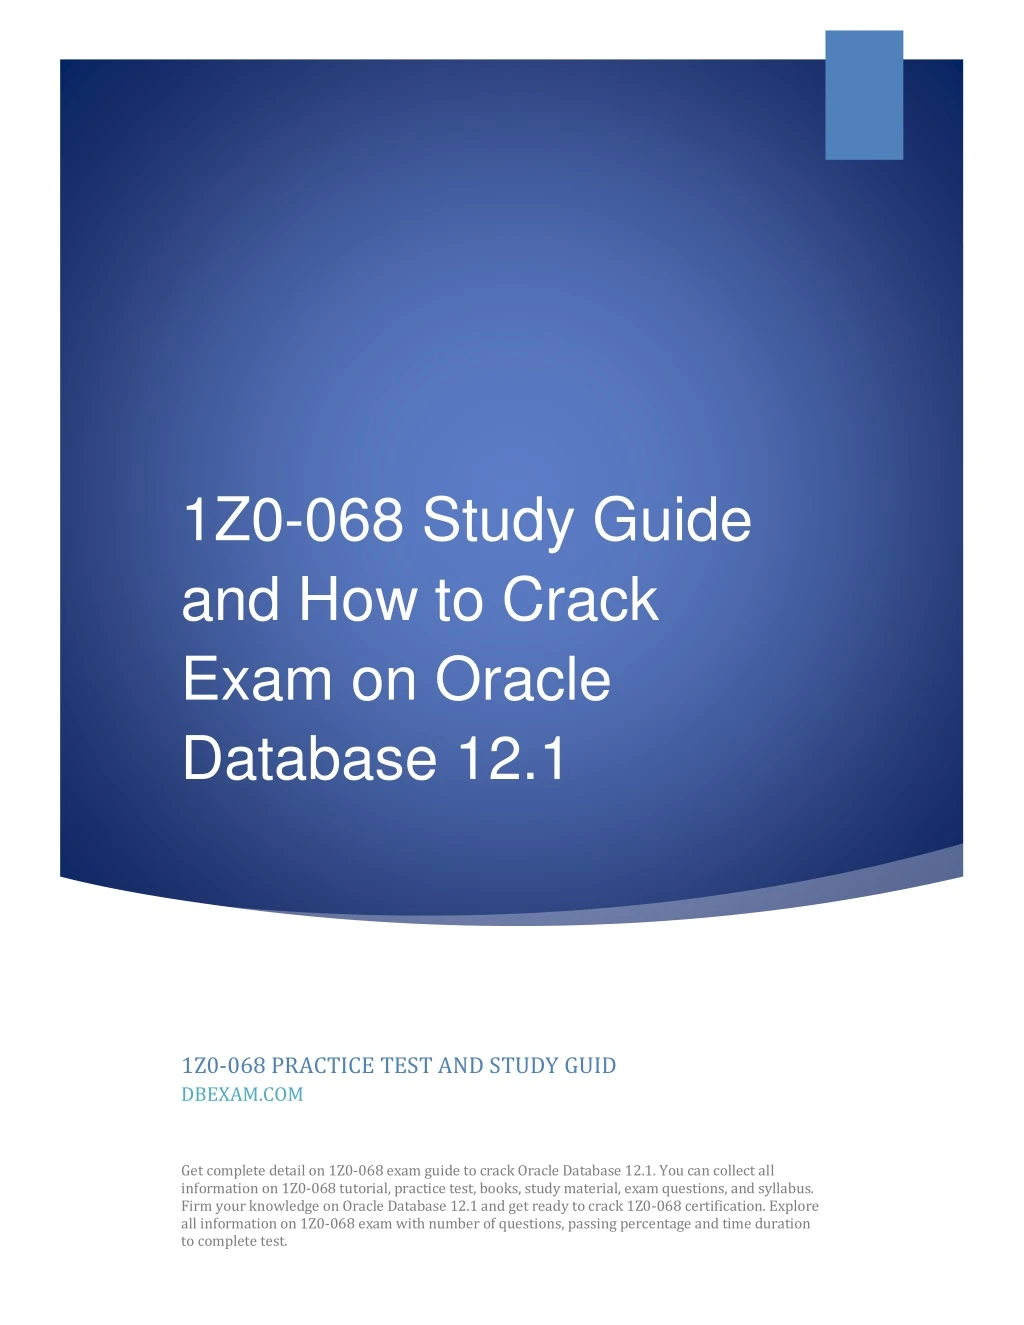 1z0 068 study guide and how to crack exam